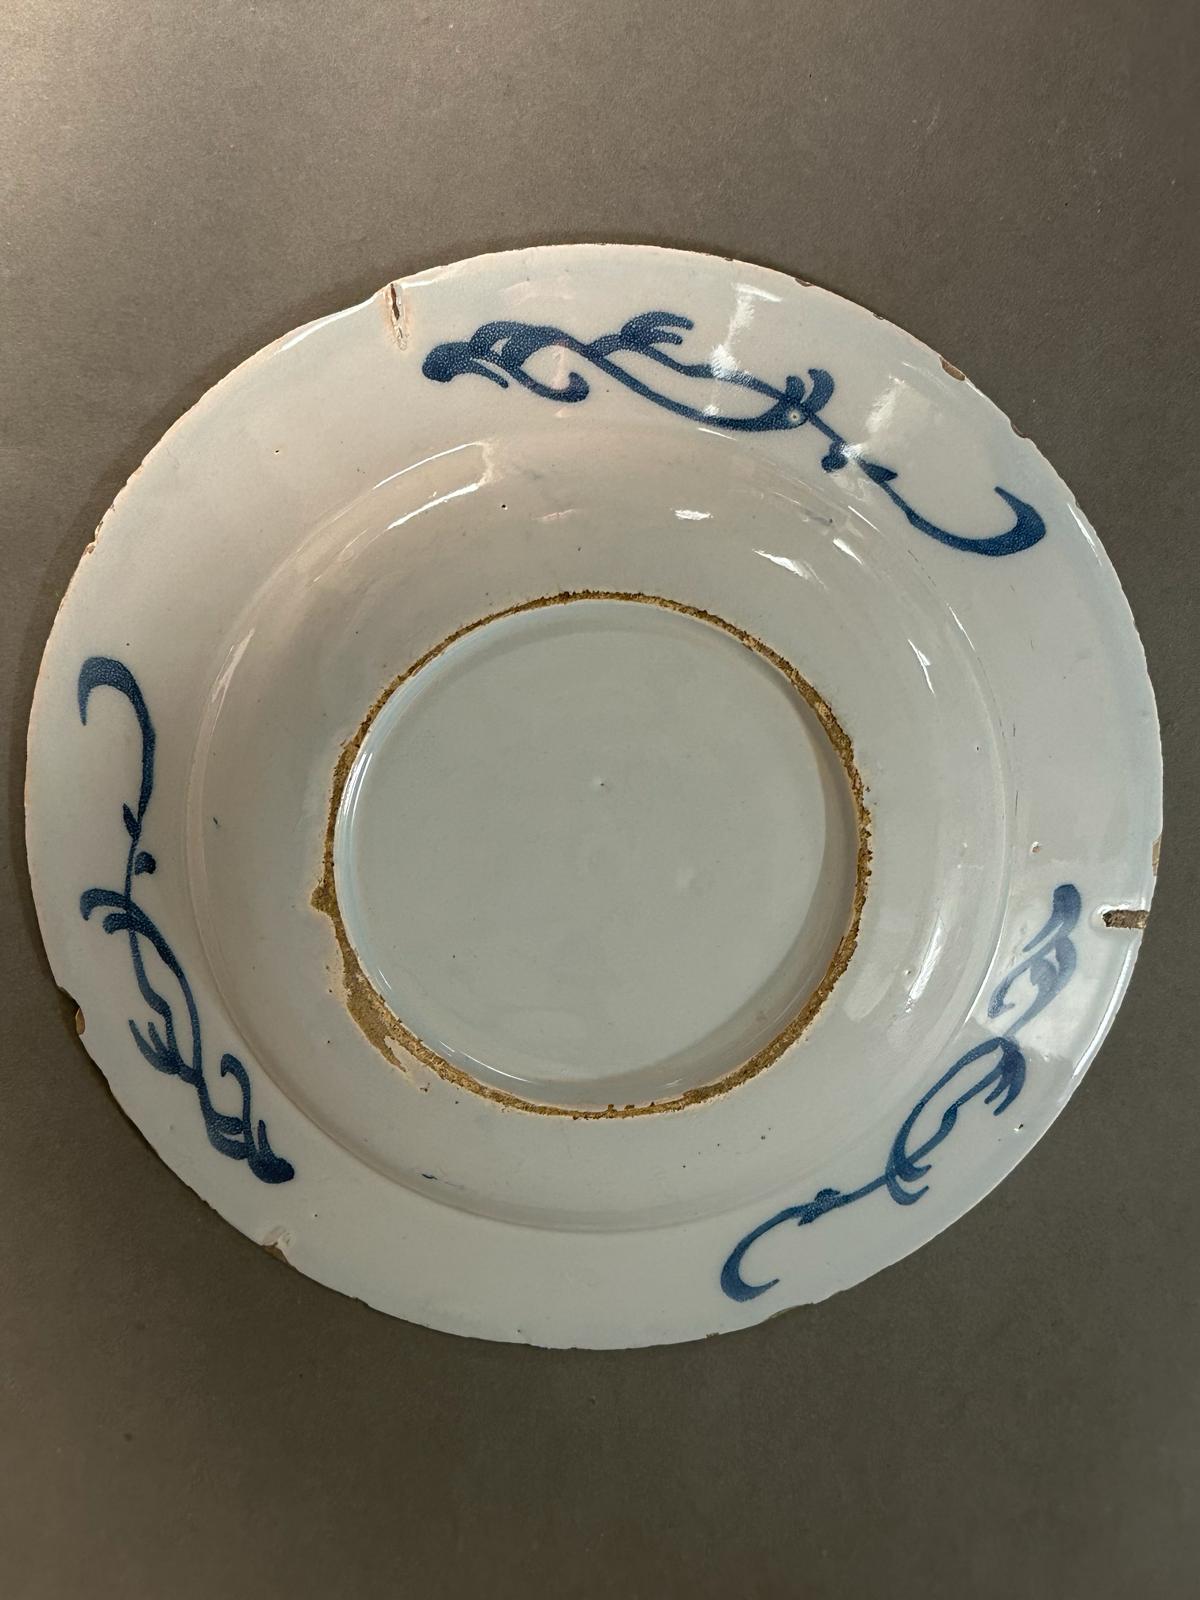 A selection of Chinese blue and white ceramic to include a plate, side plates and a small bowl - Image 12 of 12